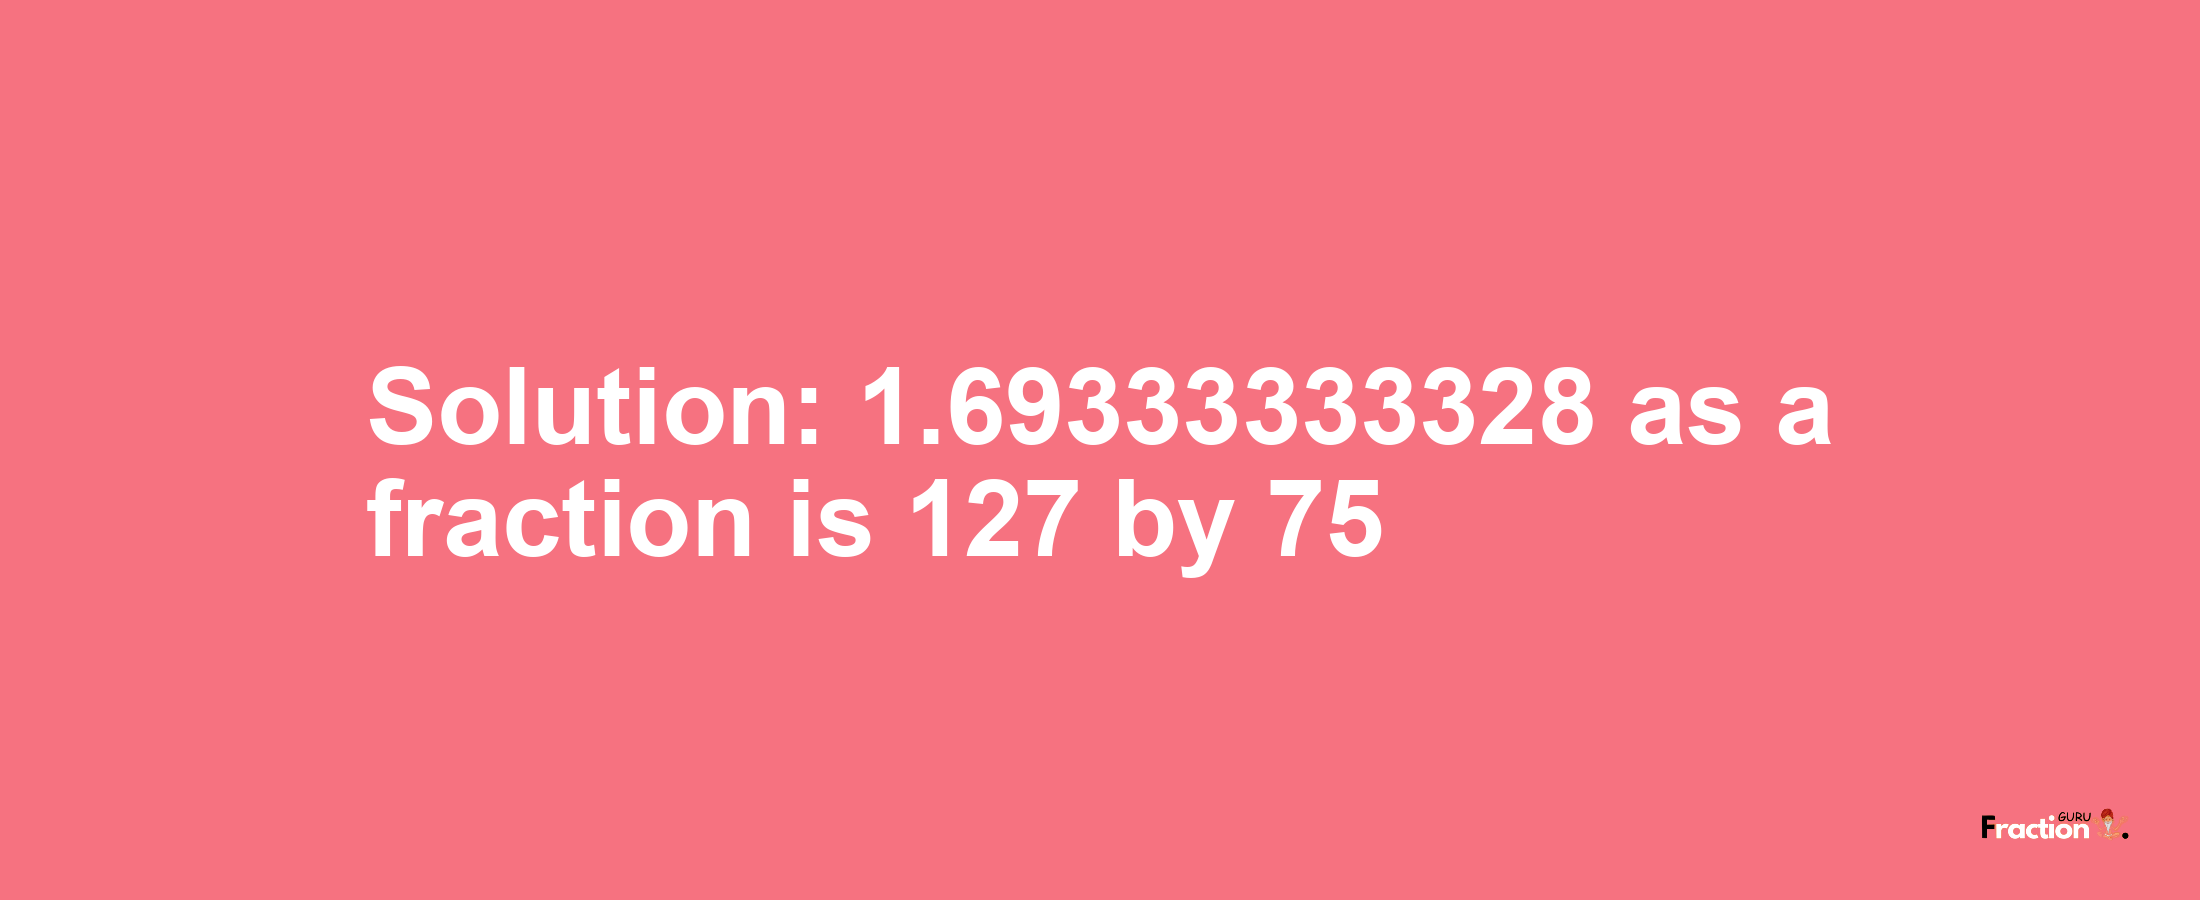 Solution:1.69333333328 as a fraction is 127/75